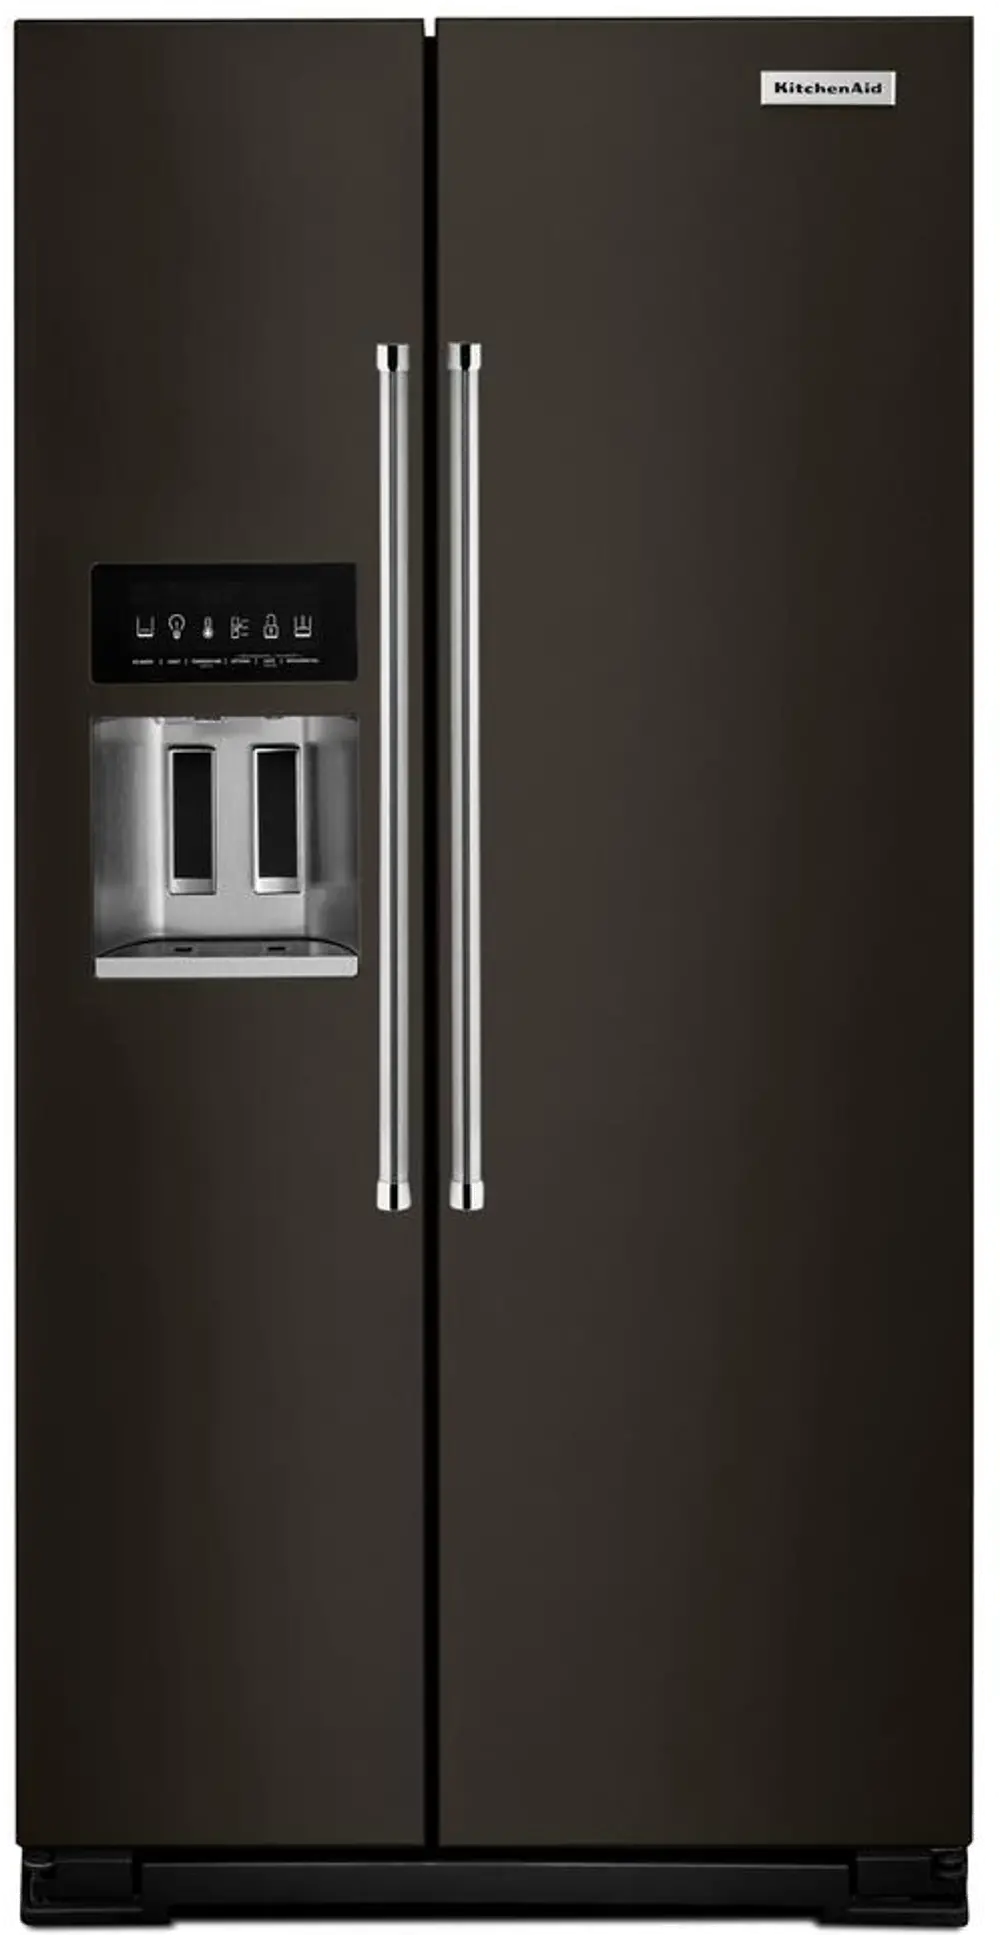 KRSC503EBS KitchenAid Counter Depth Side by Side Refrigerator - 22.7 cu. ft., 36 Inch Black Stainless Steel-1